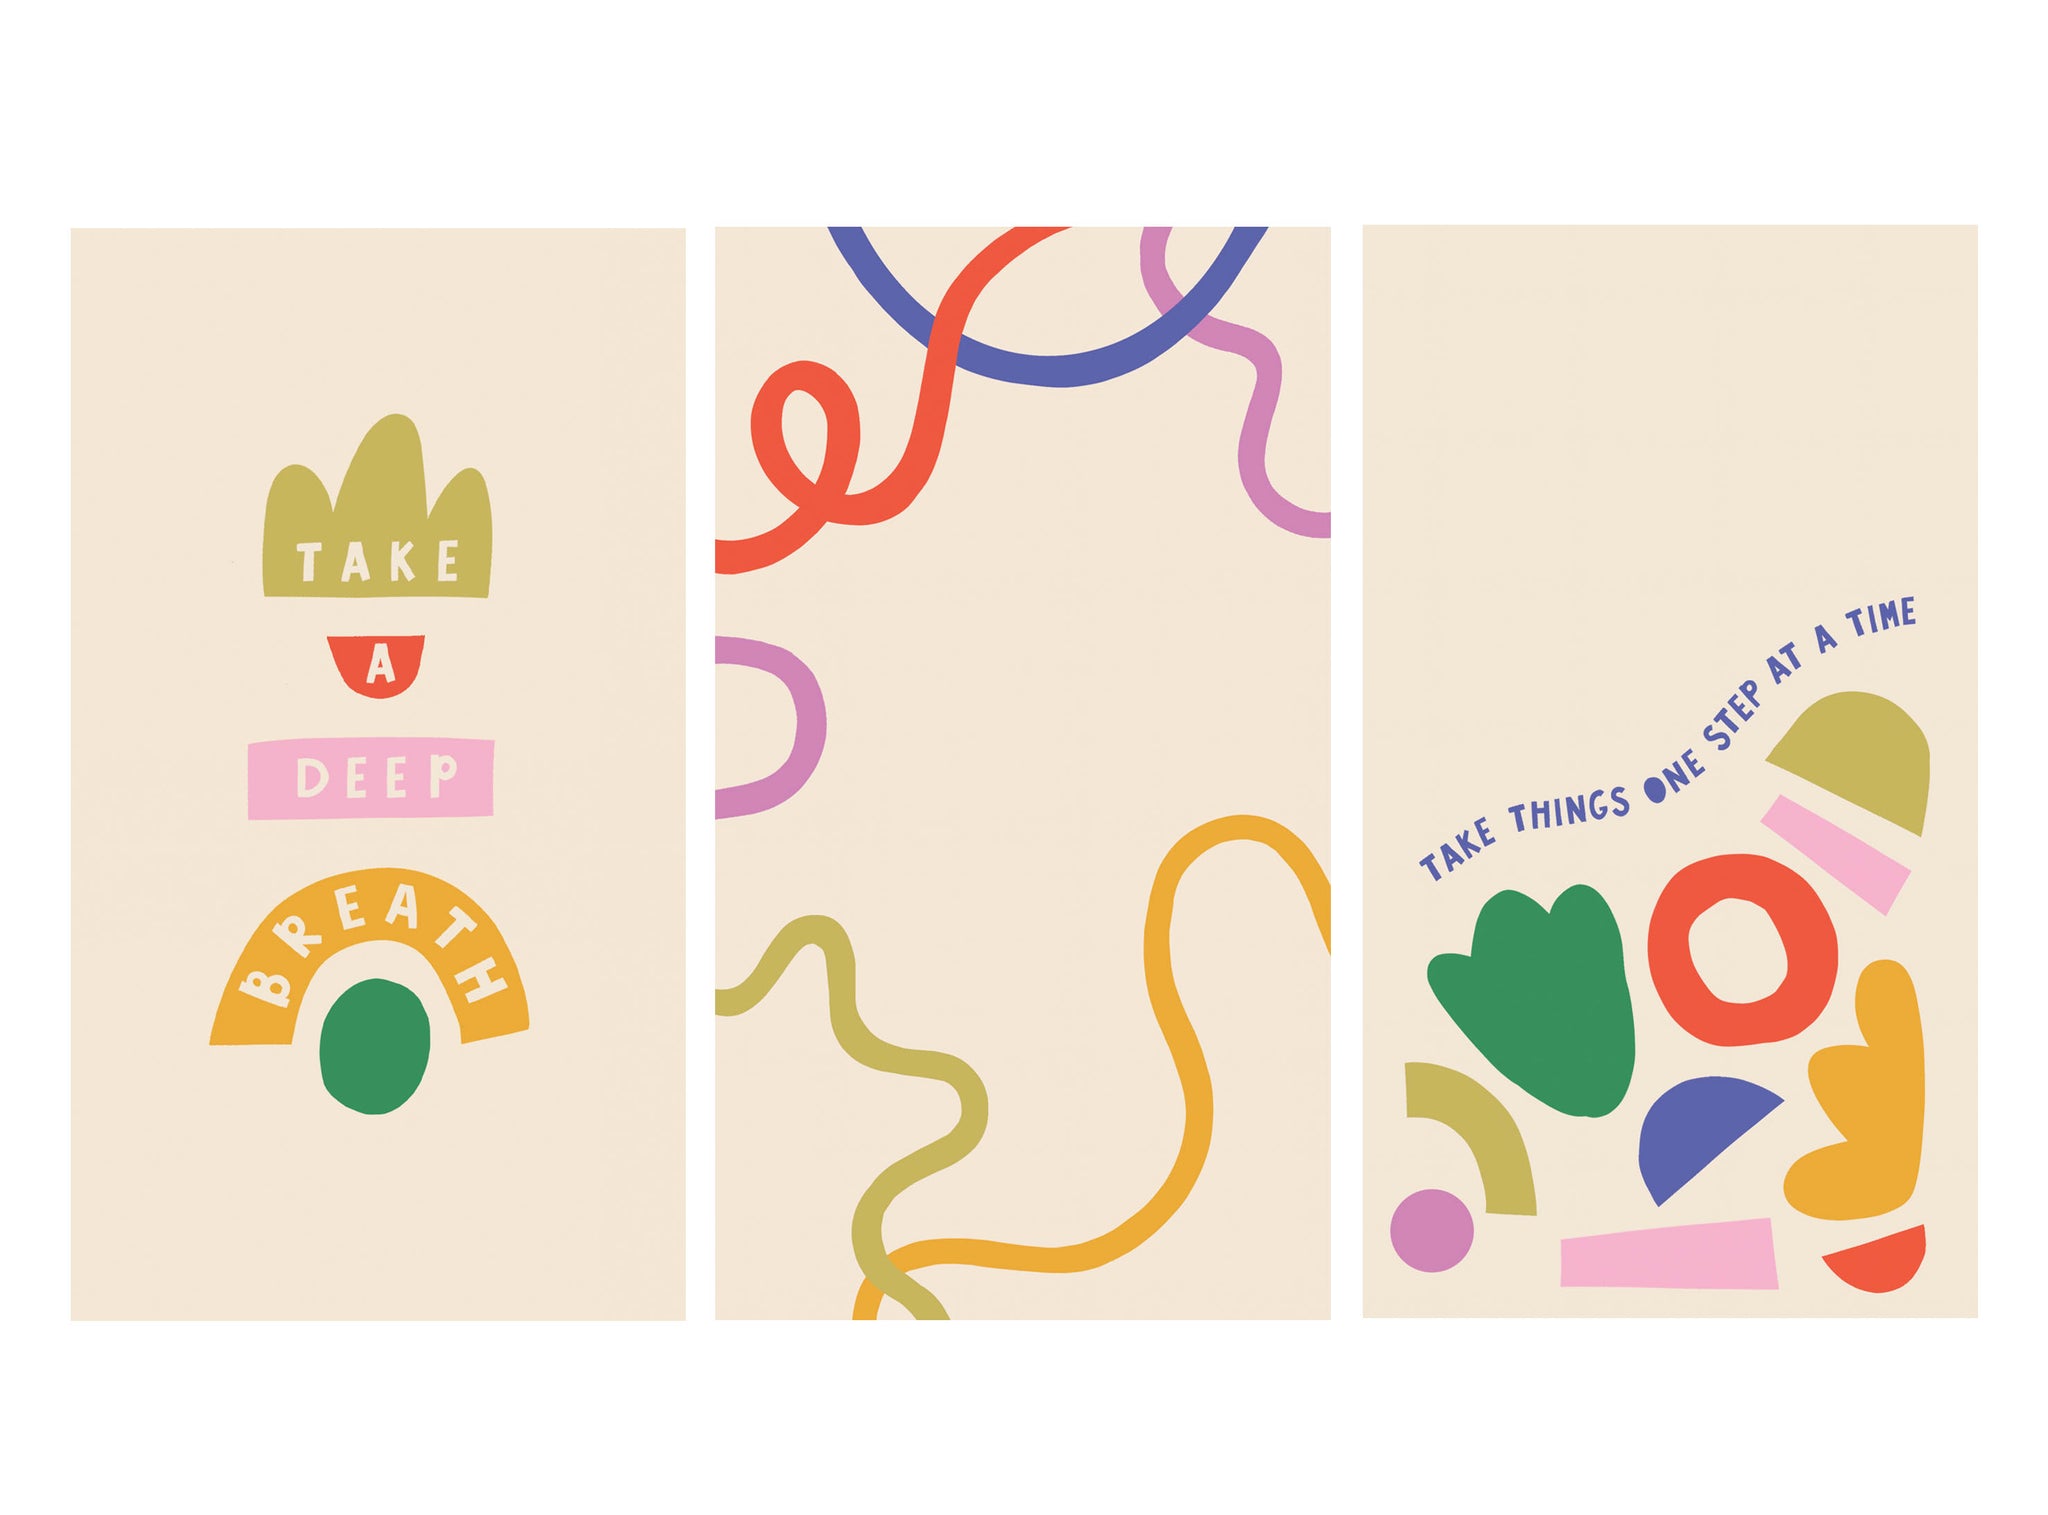 Three colourful free HD phone wallpaper downloads - 'Take a Deep Breath', colourful squiggles and 'Take one step at a time' | Raspberry Blossom